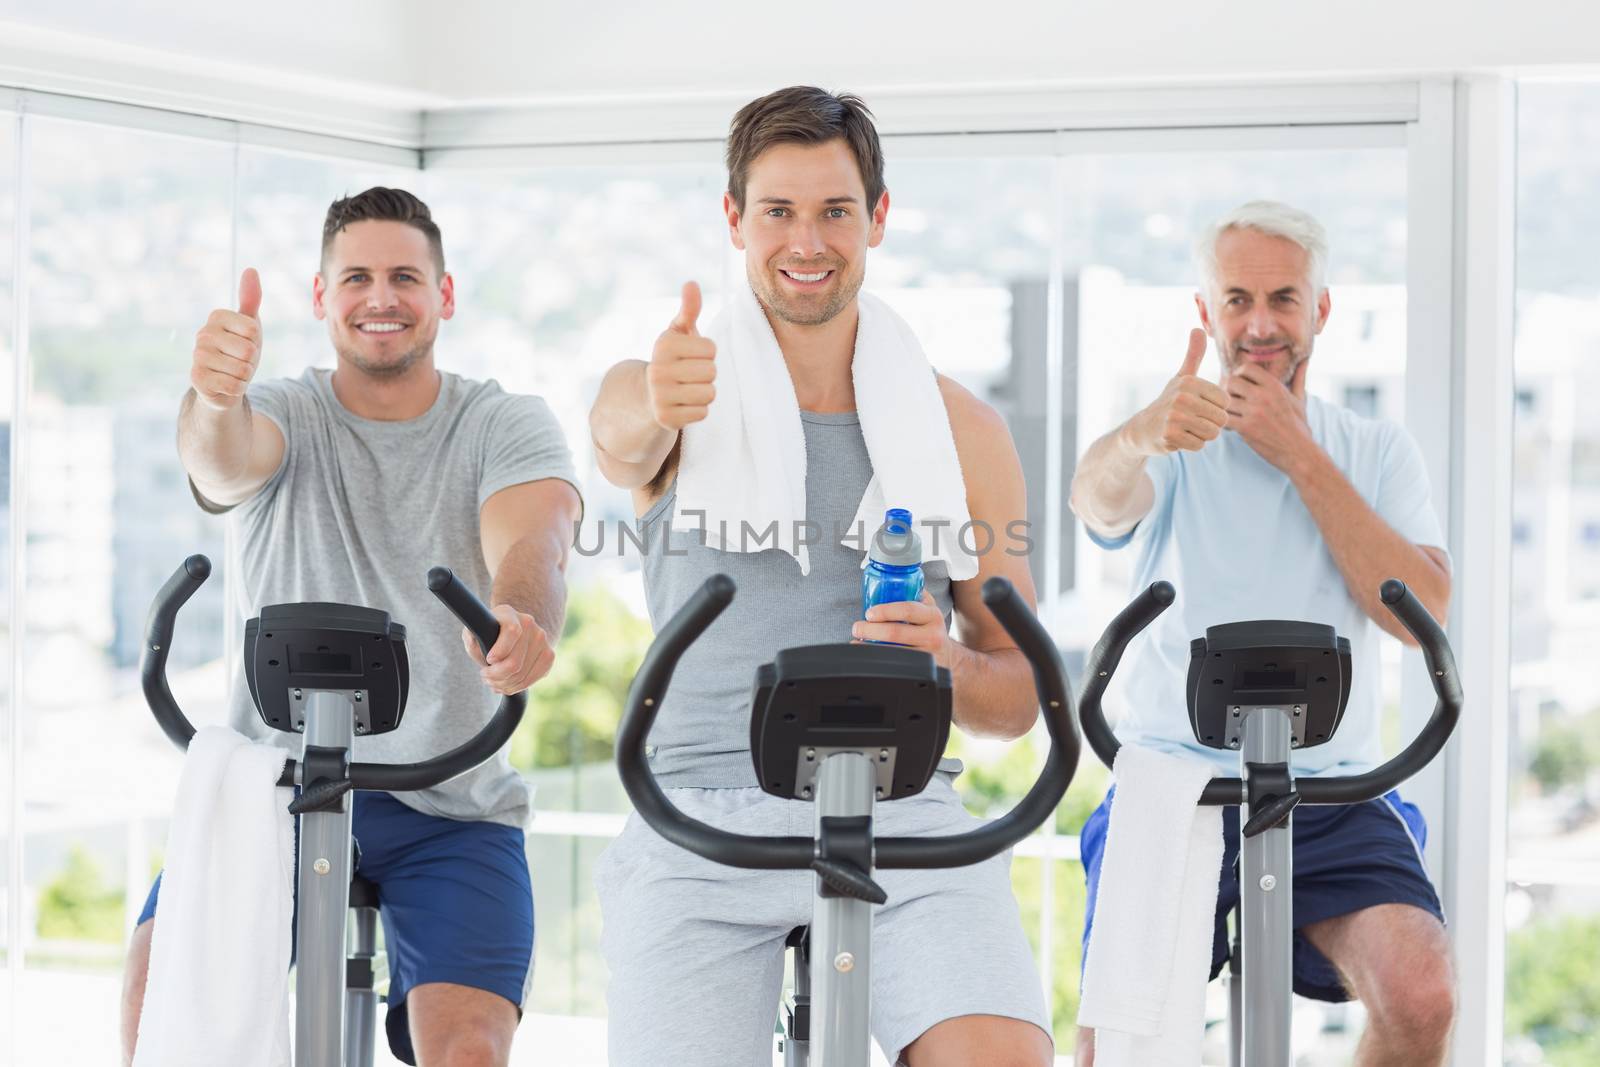 Portrait of men on exercise bikes gesturing thumbs up at gym